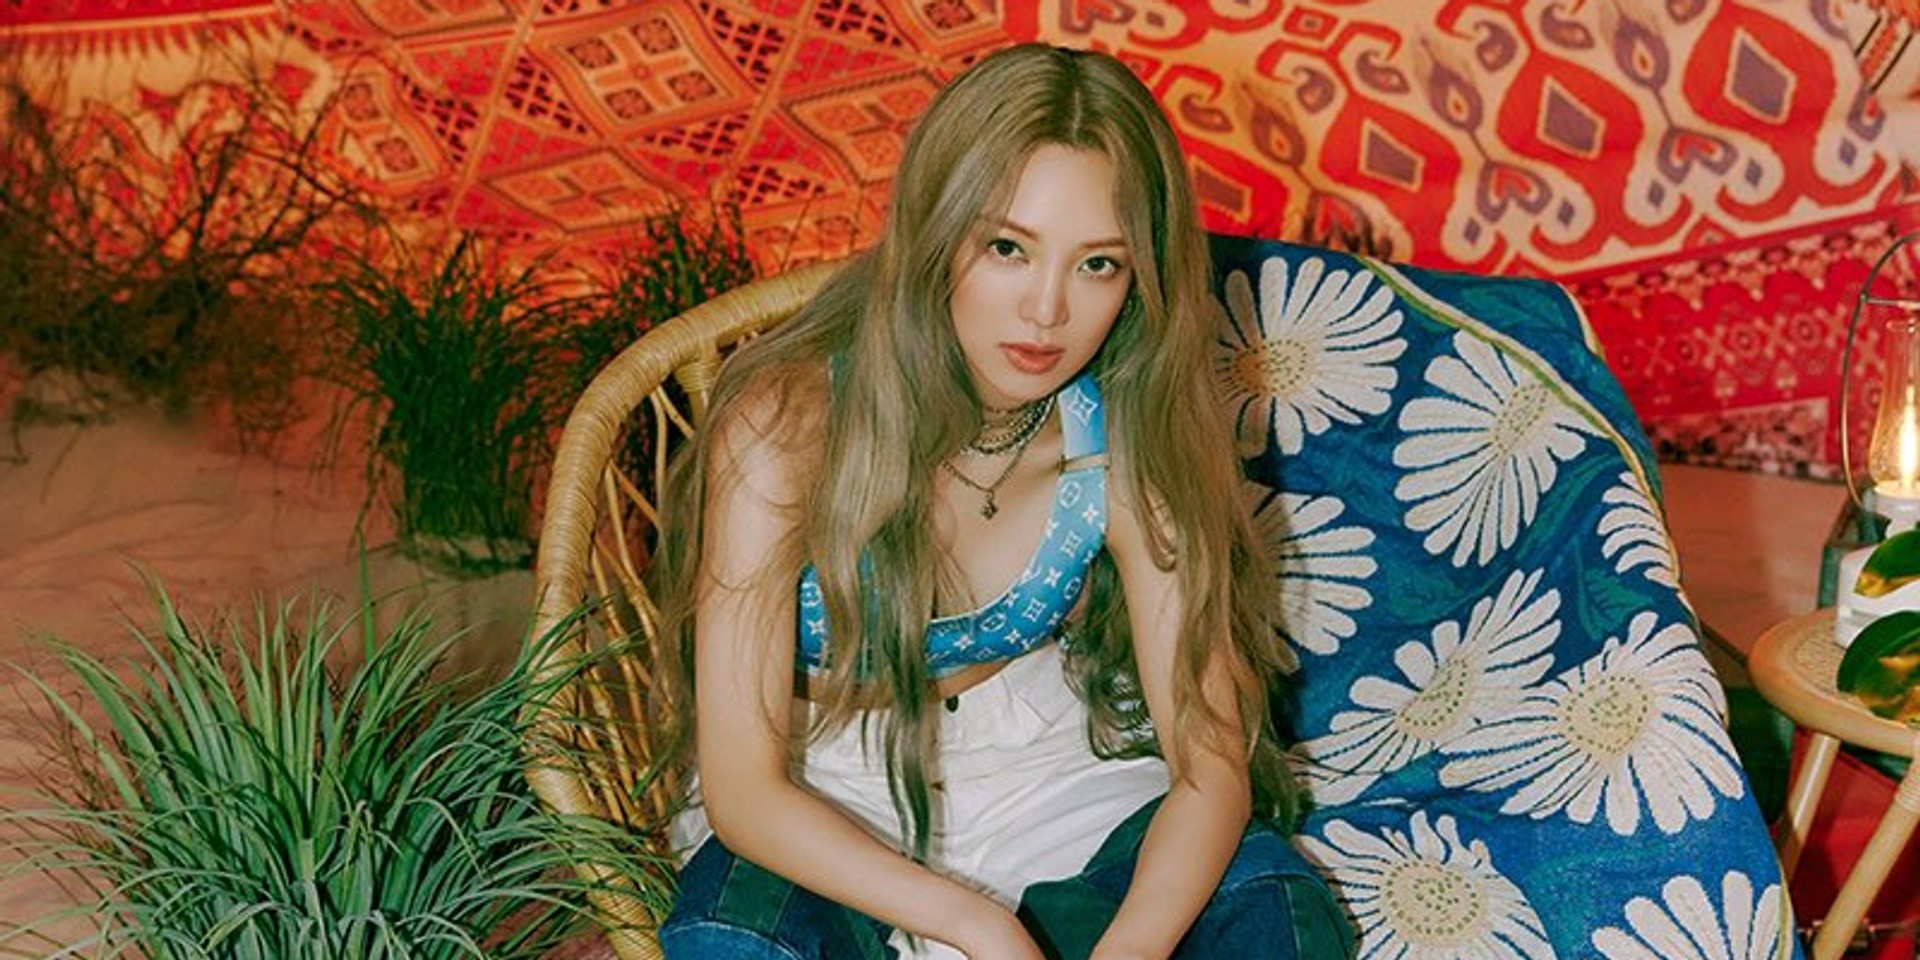 Girls' Generation's Hyoyeon returns this August as HYO with new single featuring BIBI